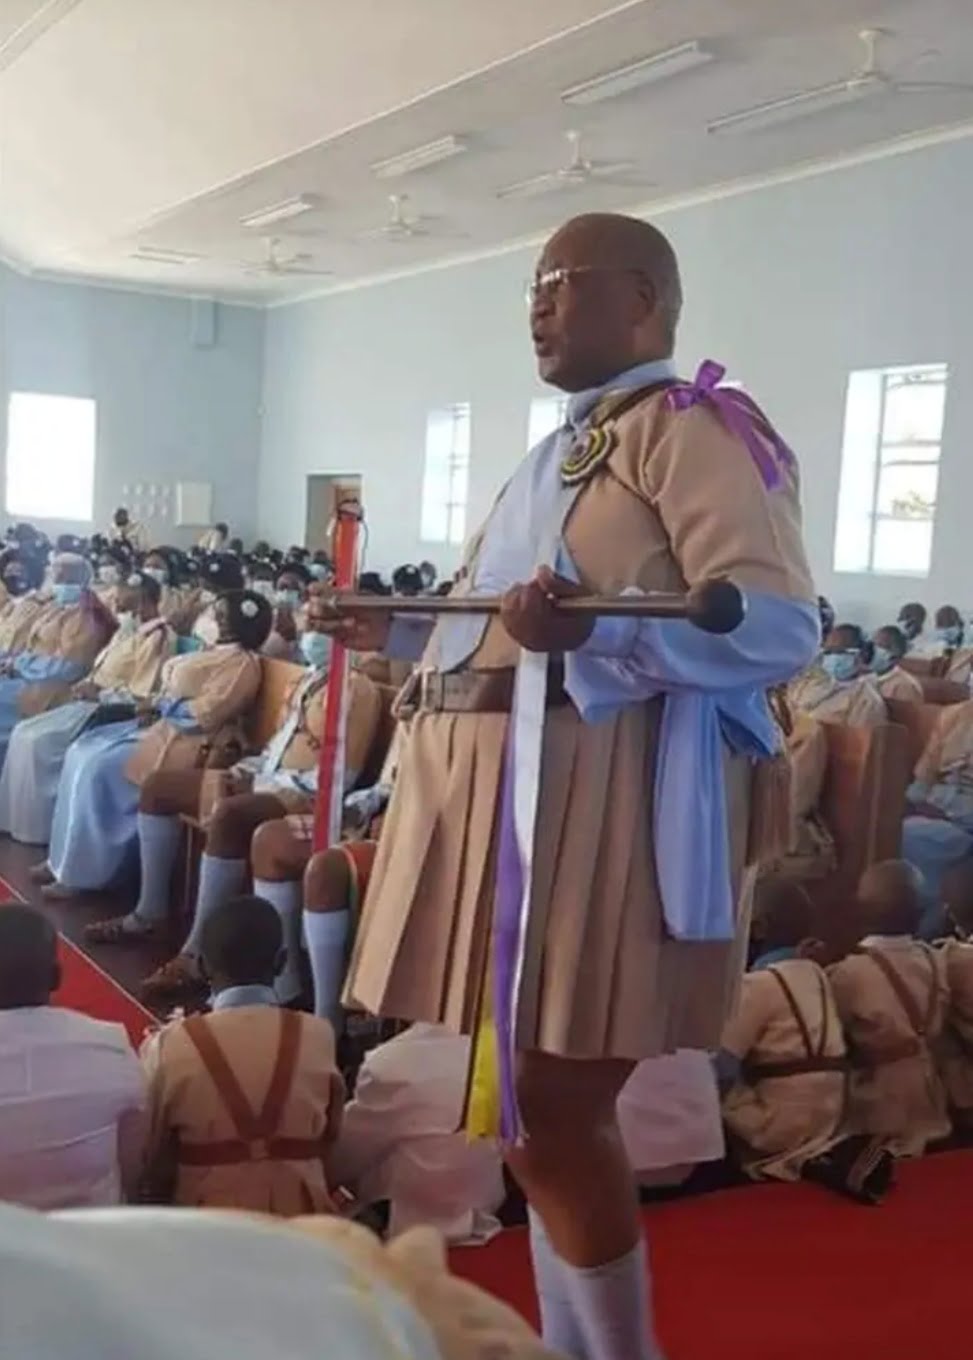 Pictures| A new church uniform left people in disbelief